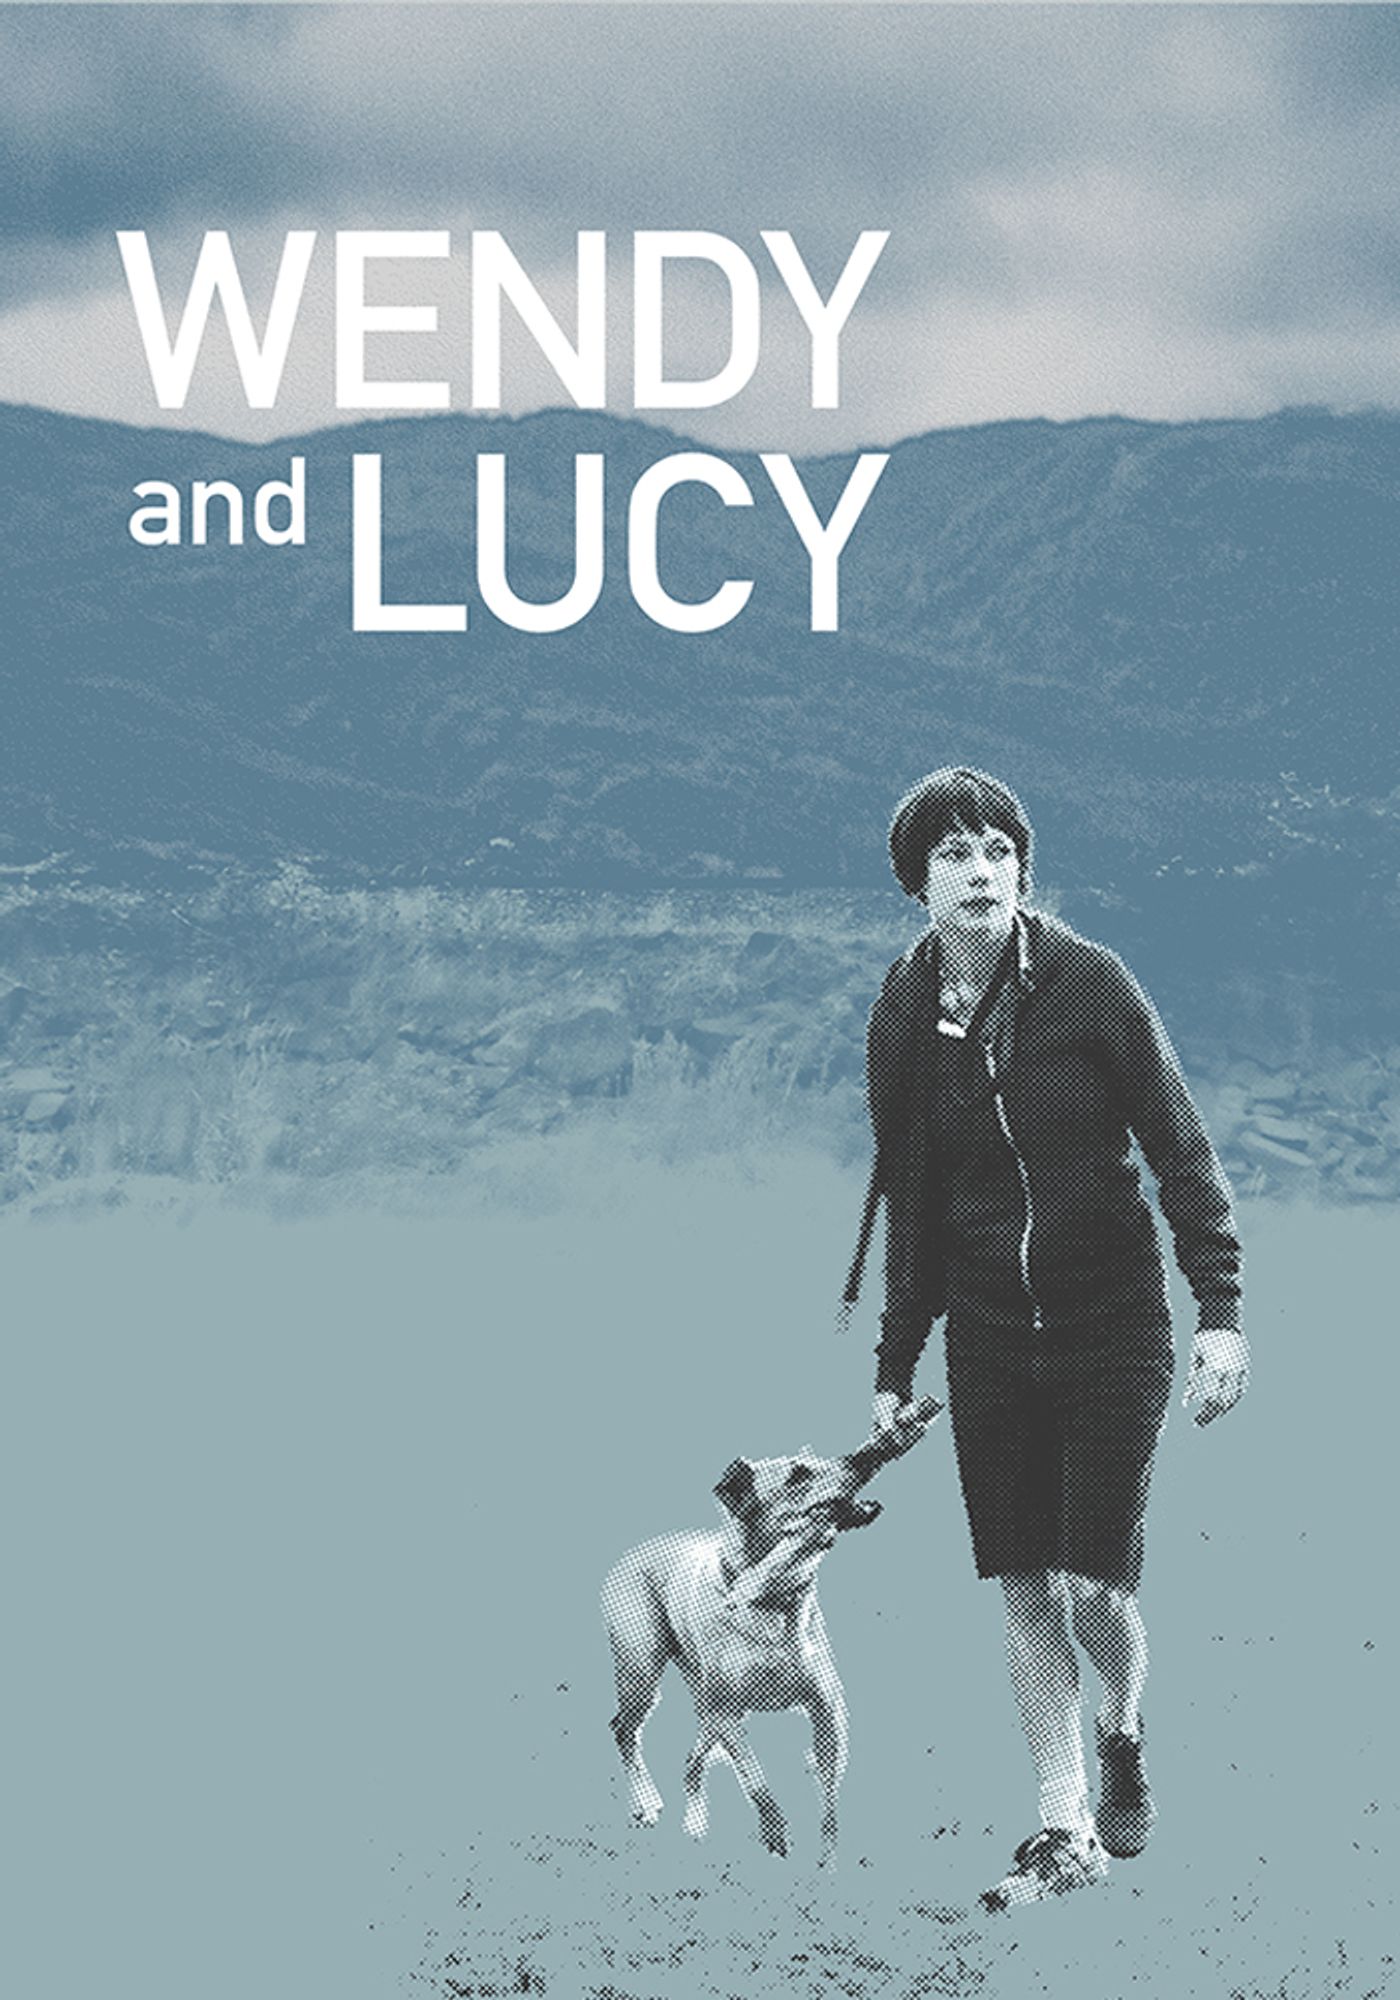 Wendy y Lucy